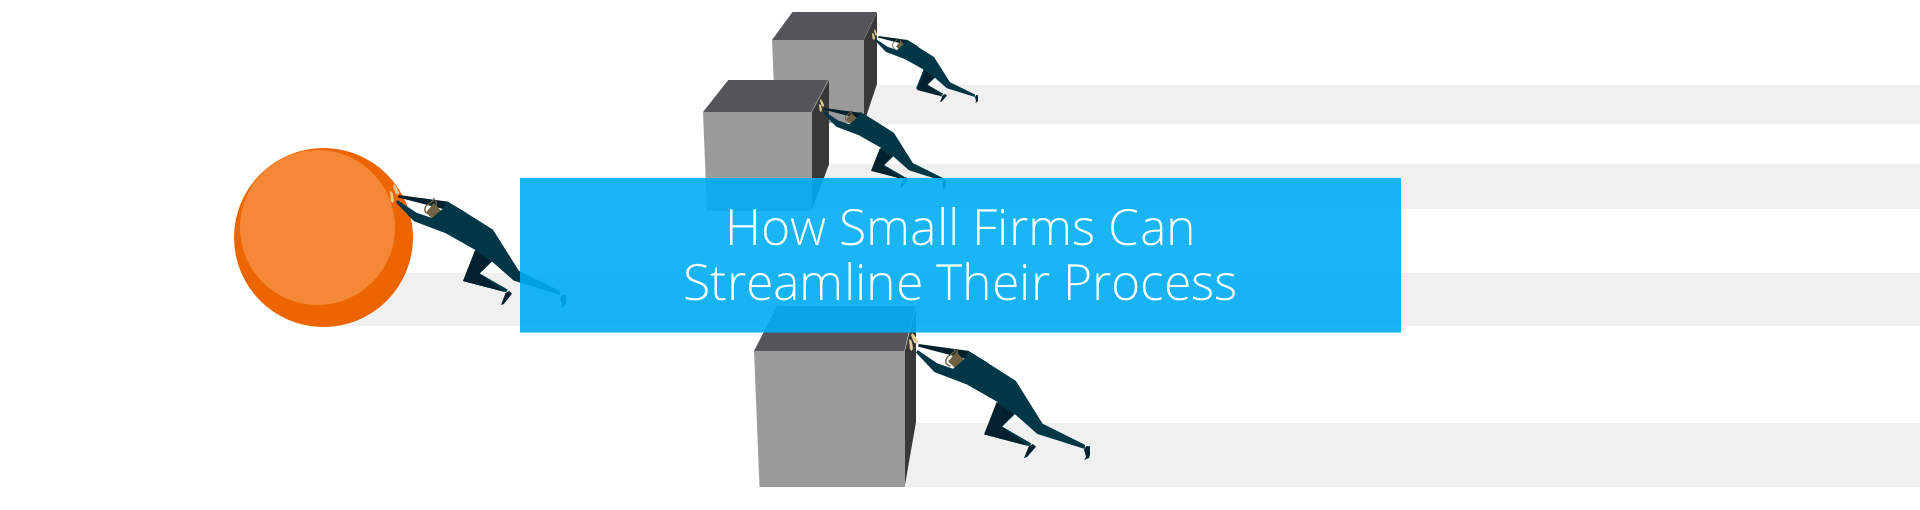 How Small Firms Can Streamline Their Processes Featured Image